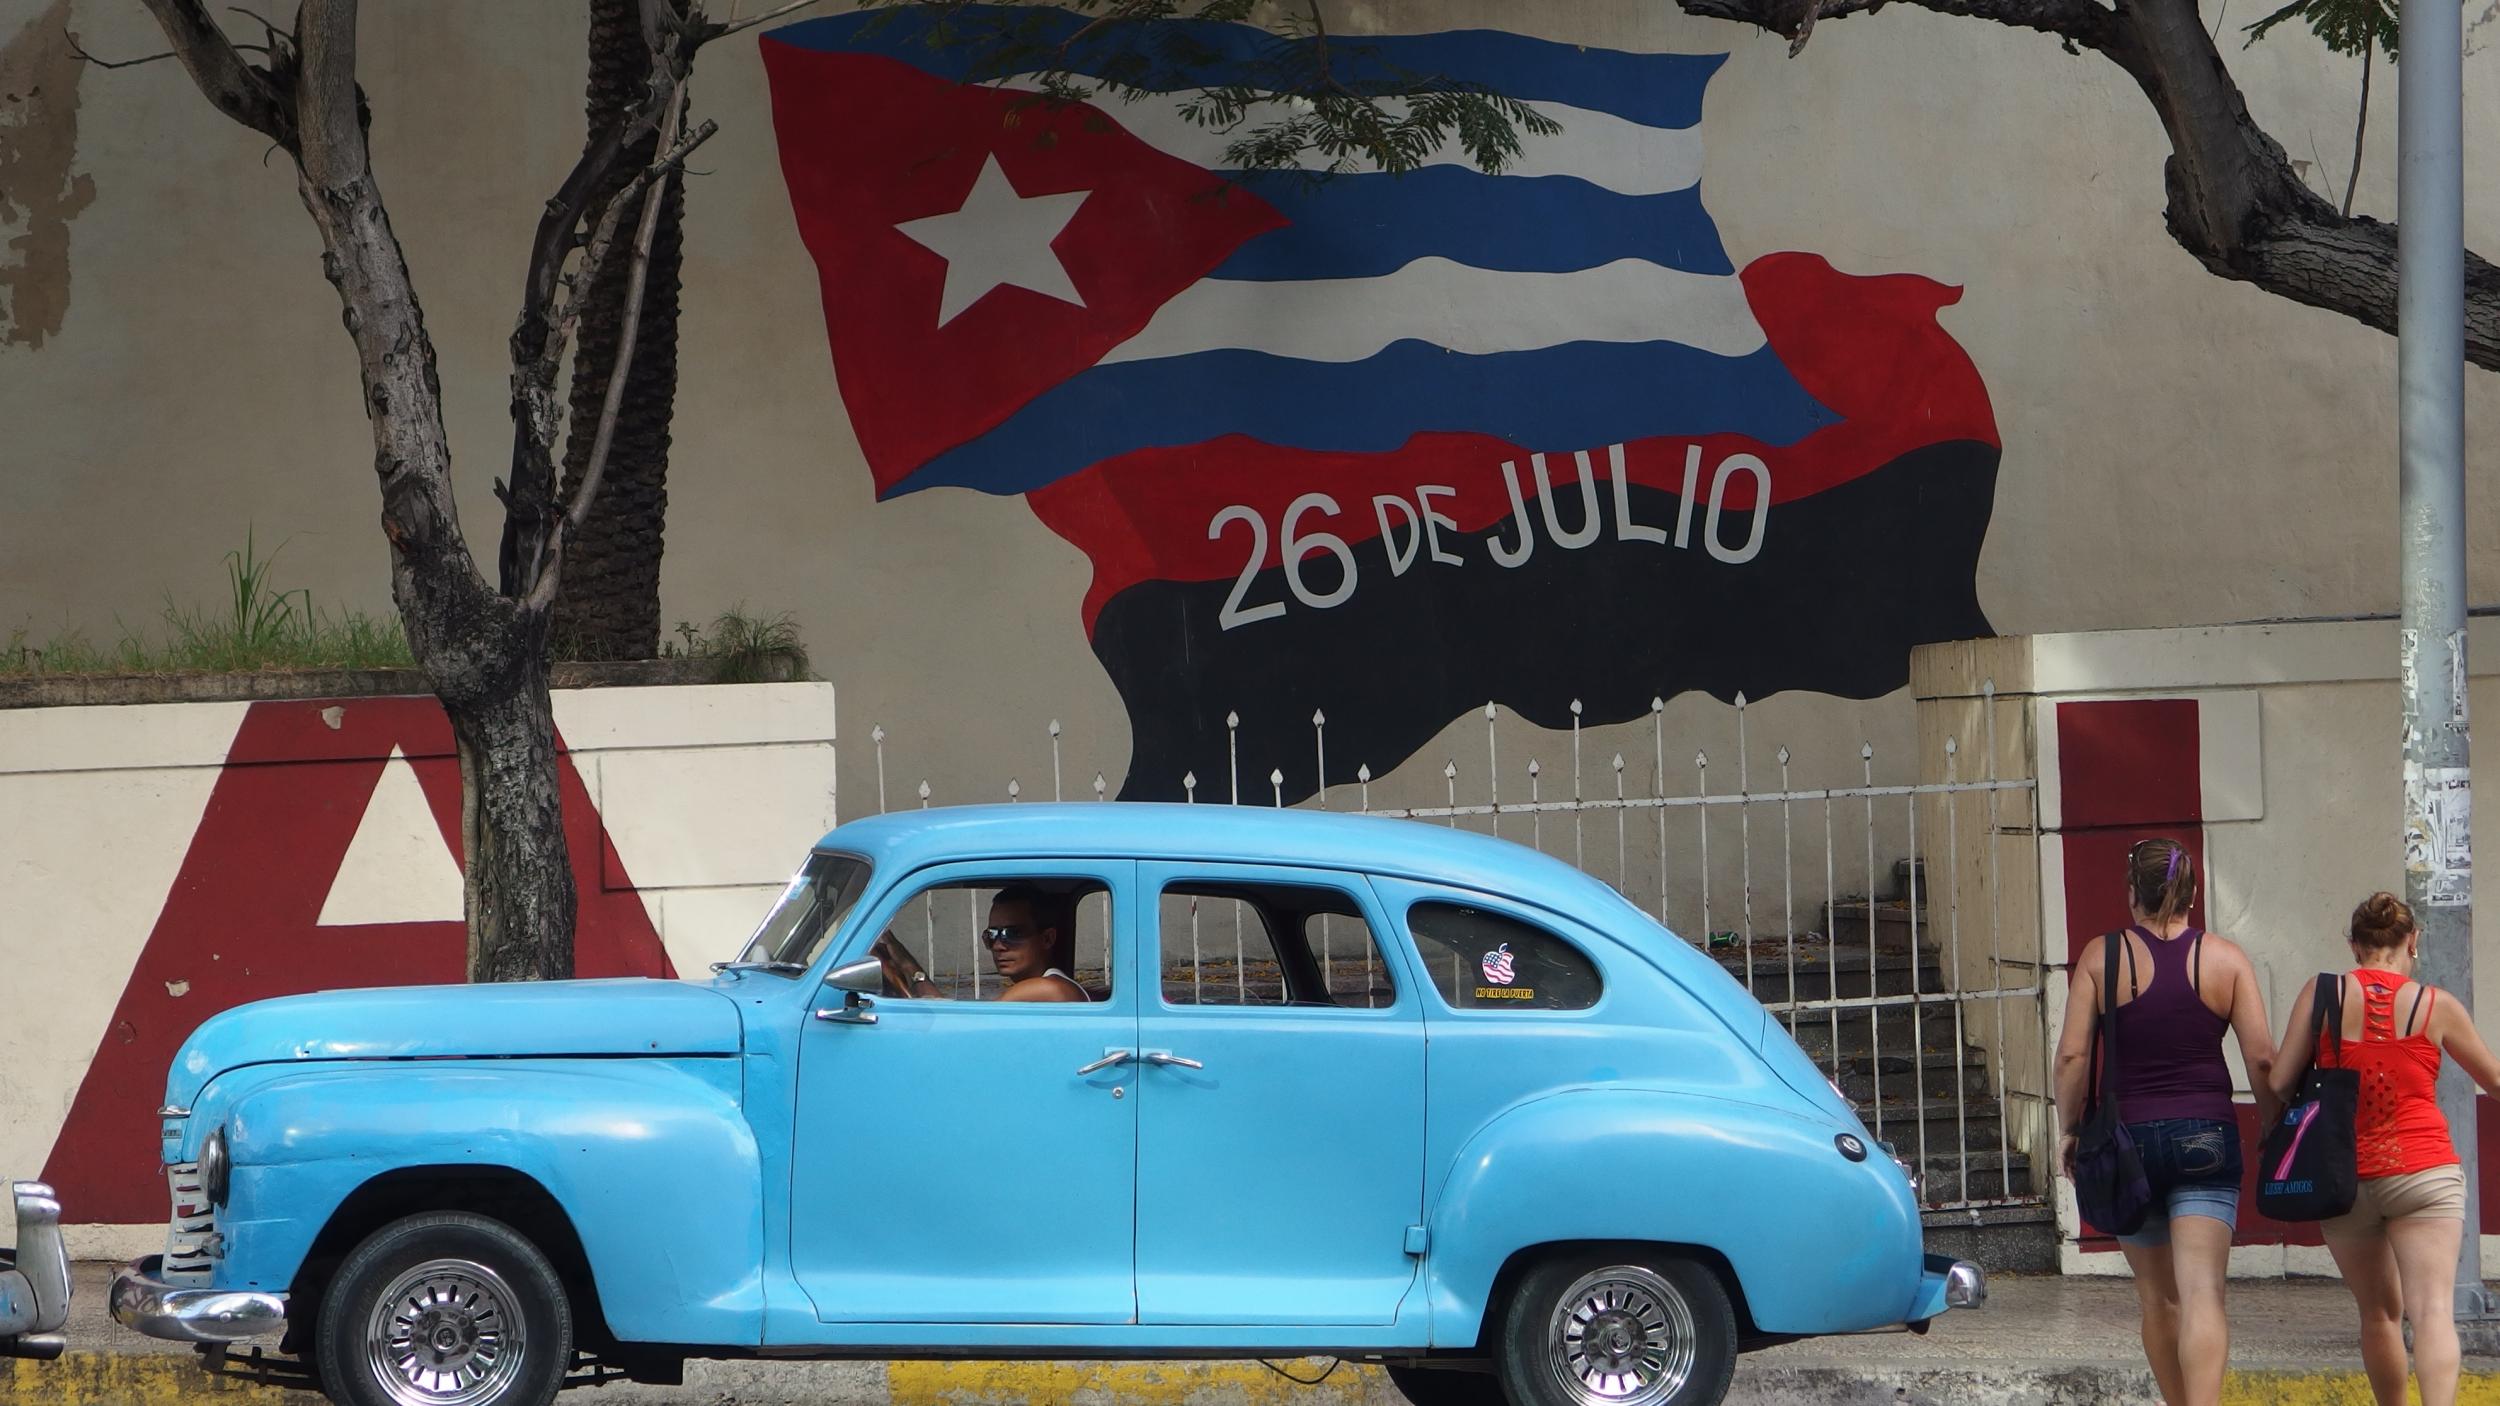 Road trip? People who have been to Cuba cannot then travel to the US with the usual Esta